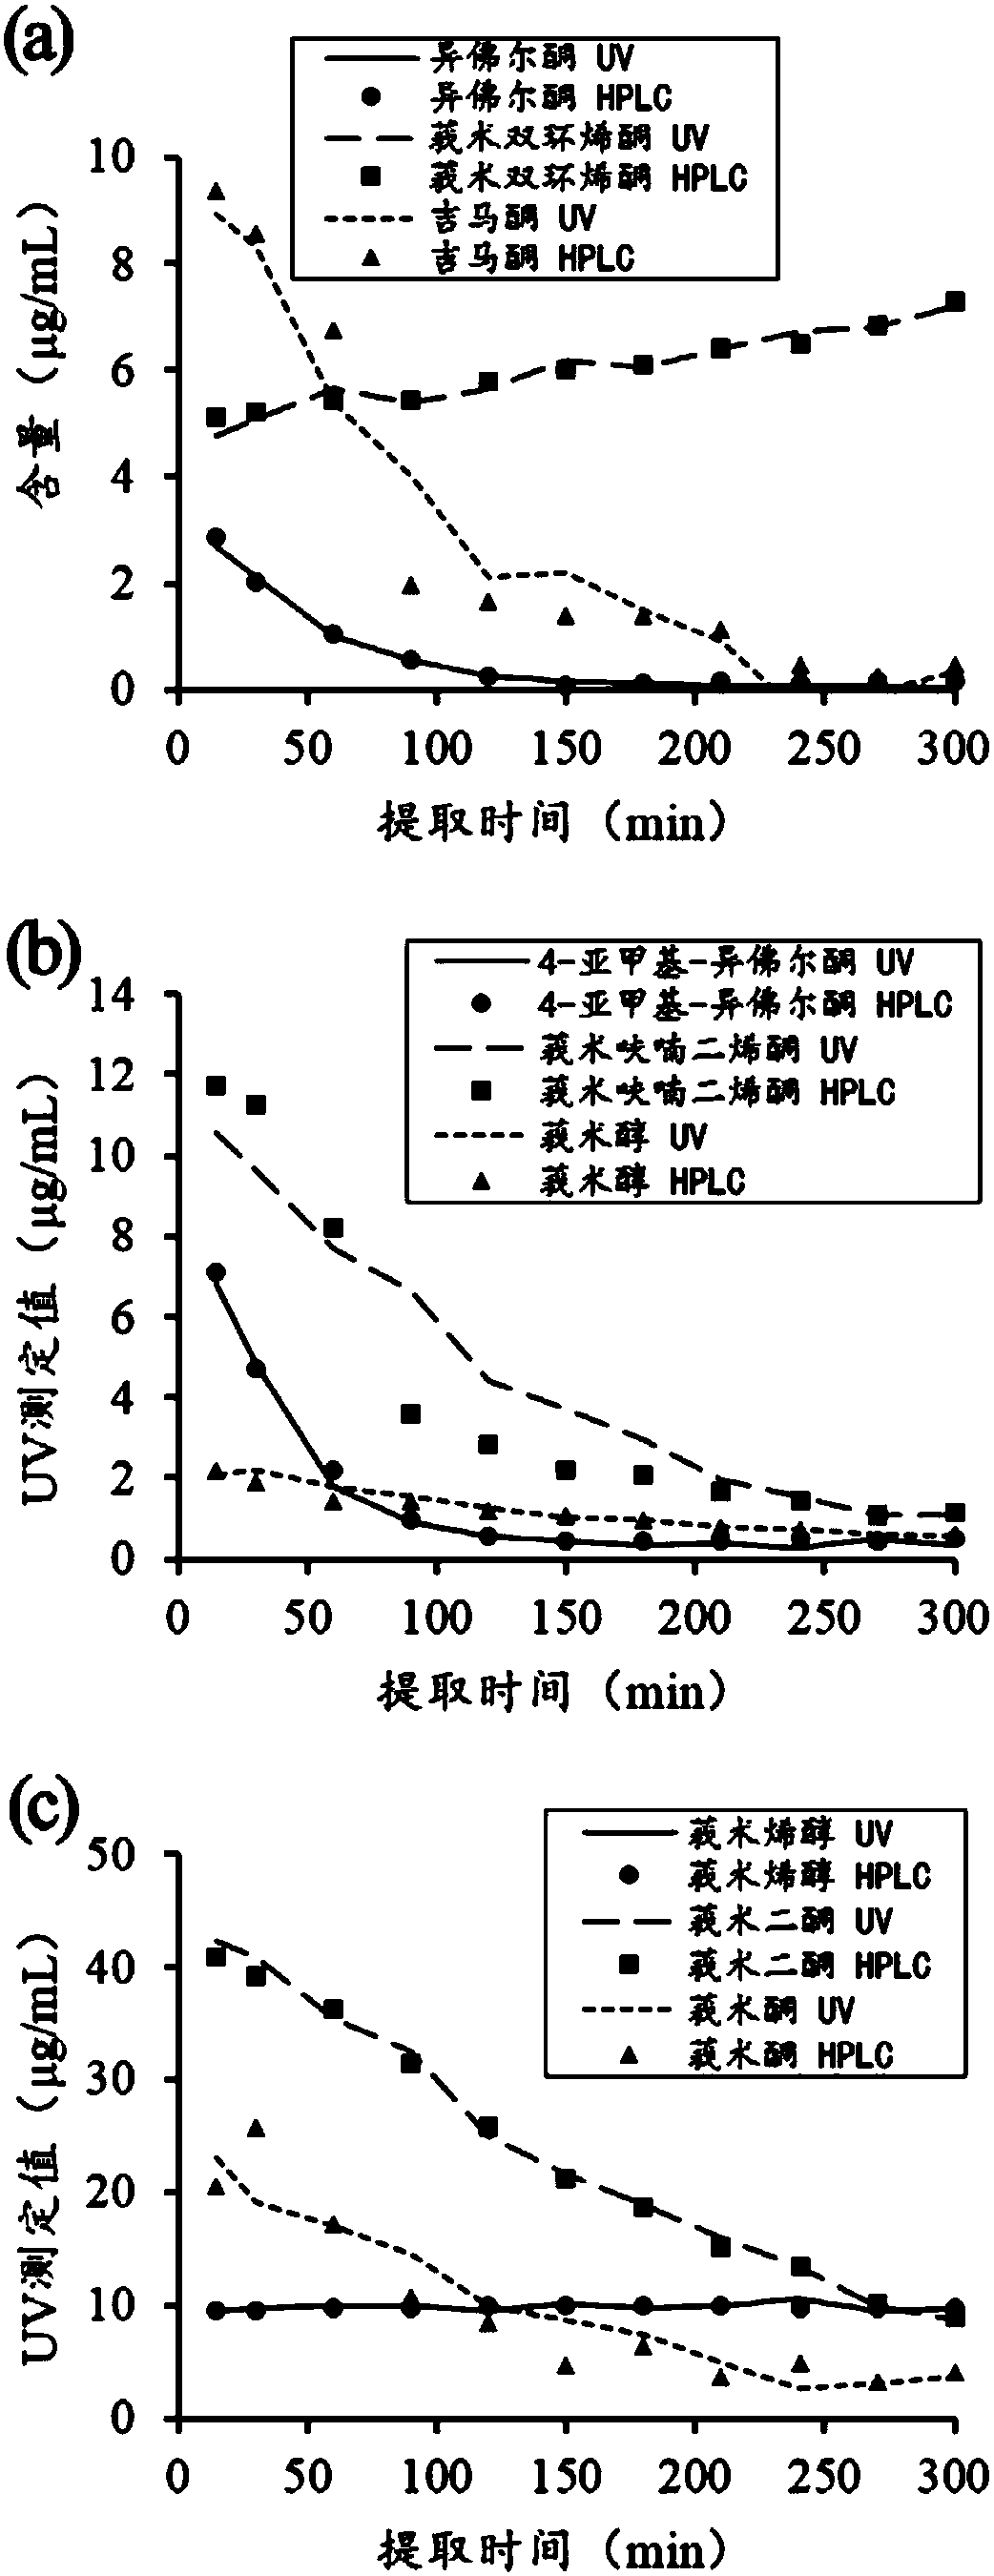 Method for rapidly testing multiple component contents in radix curcumae-jasmine steam distillation and extracting process based on ultraviolet spectrum